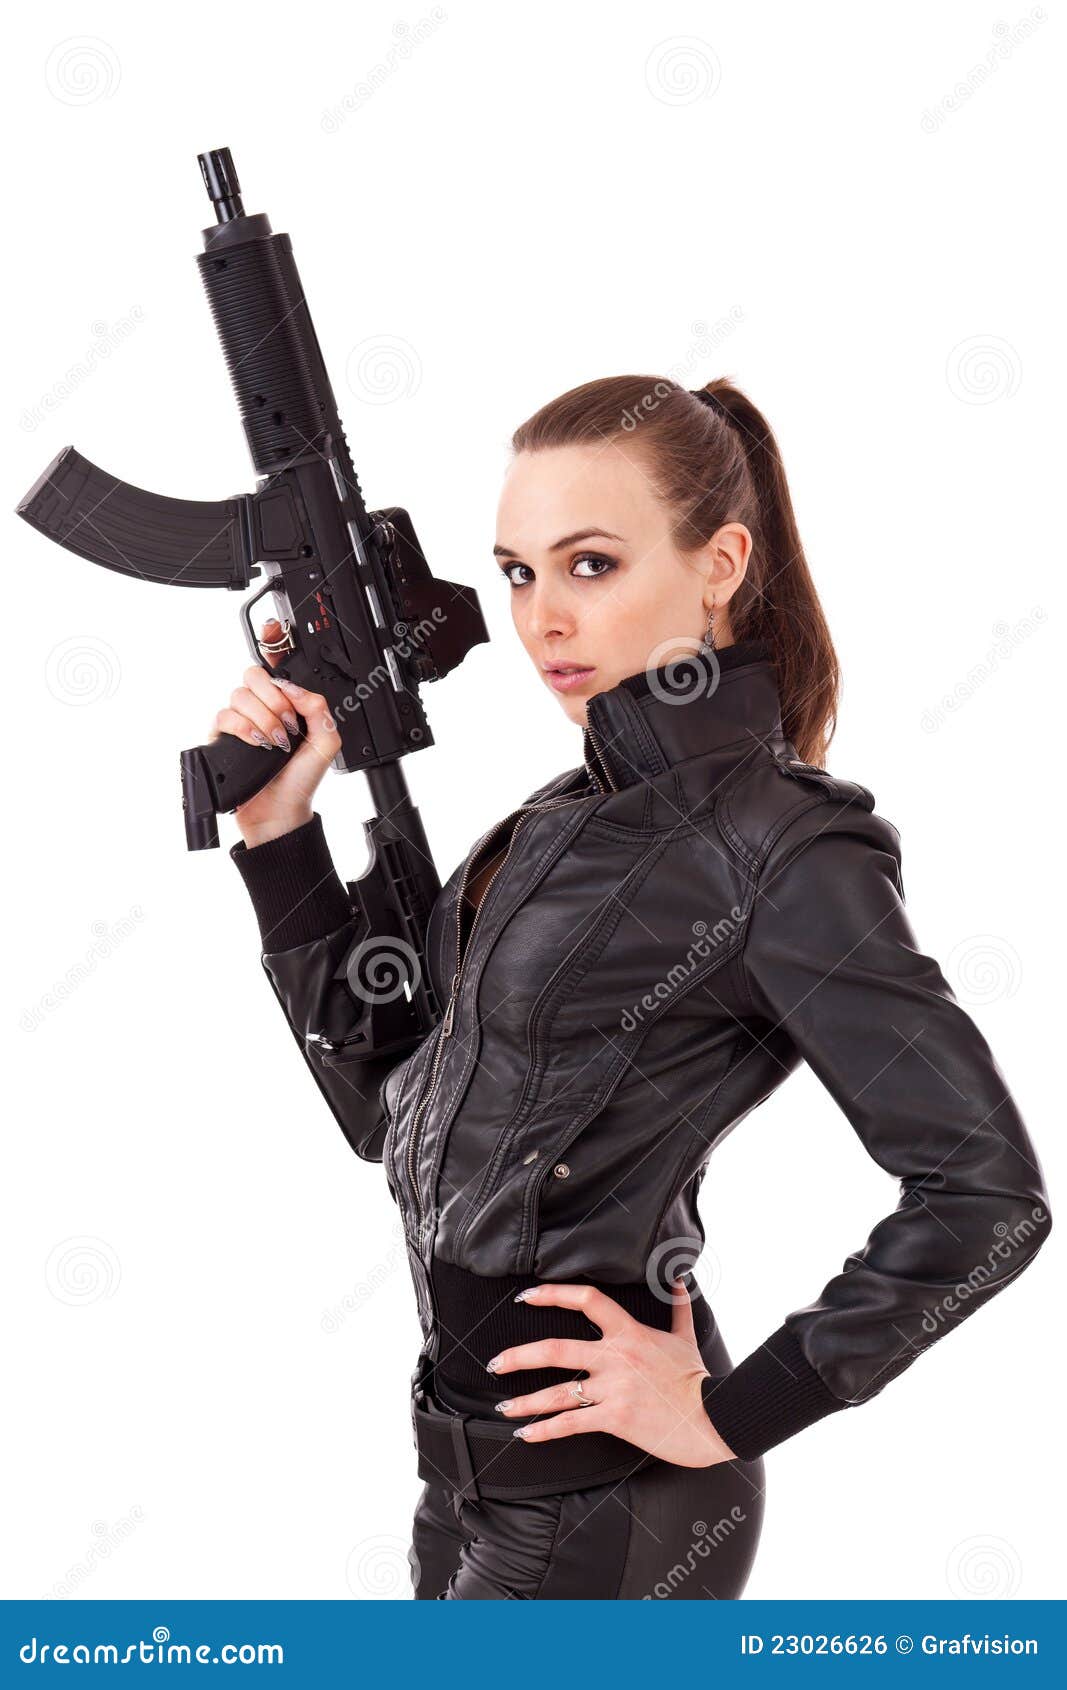 alicia mccastle recommends Pictures Of Women With Guns